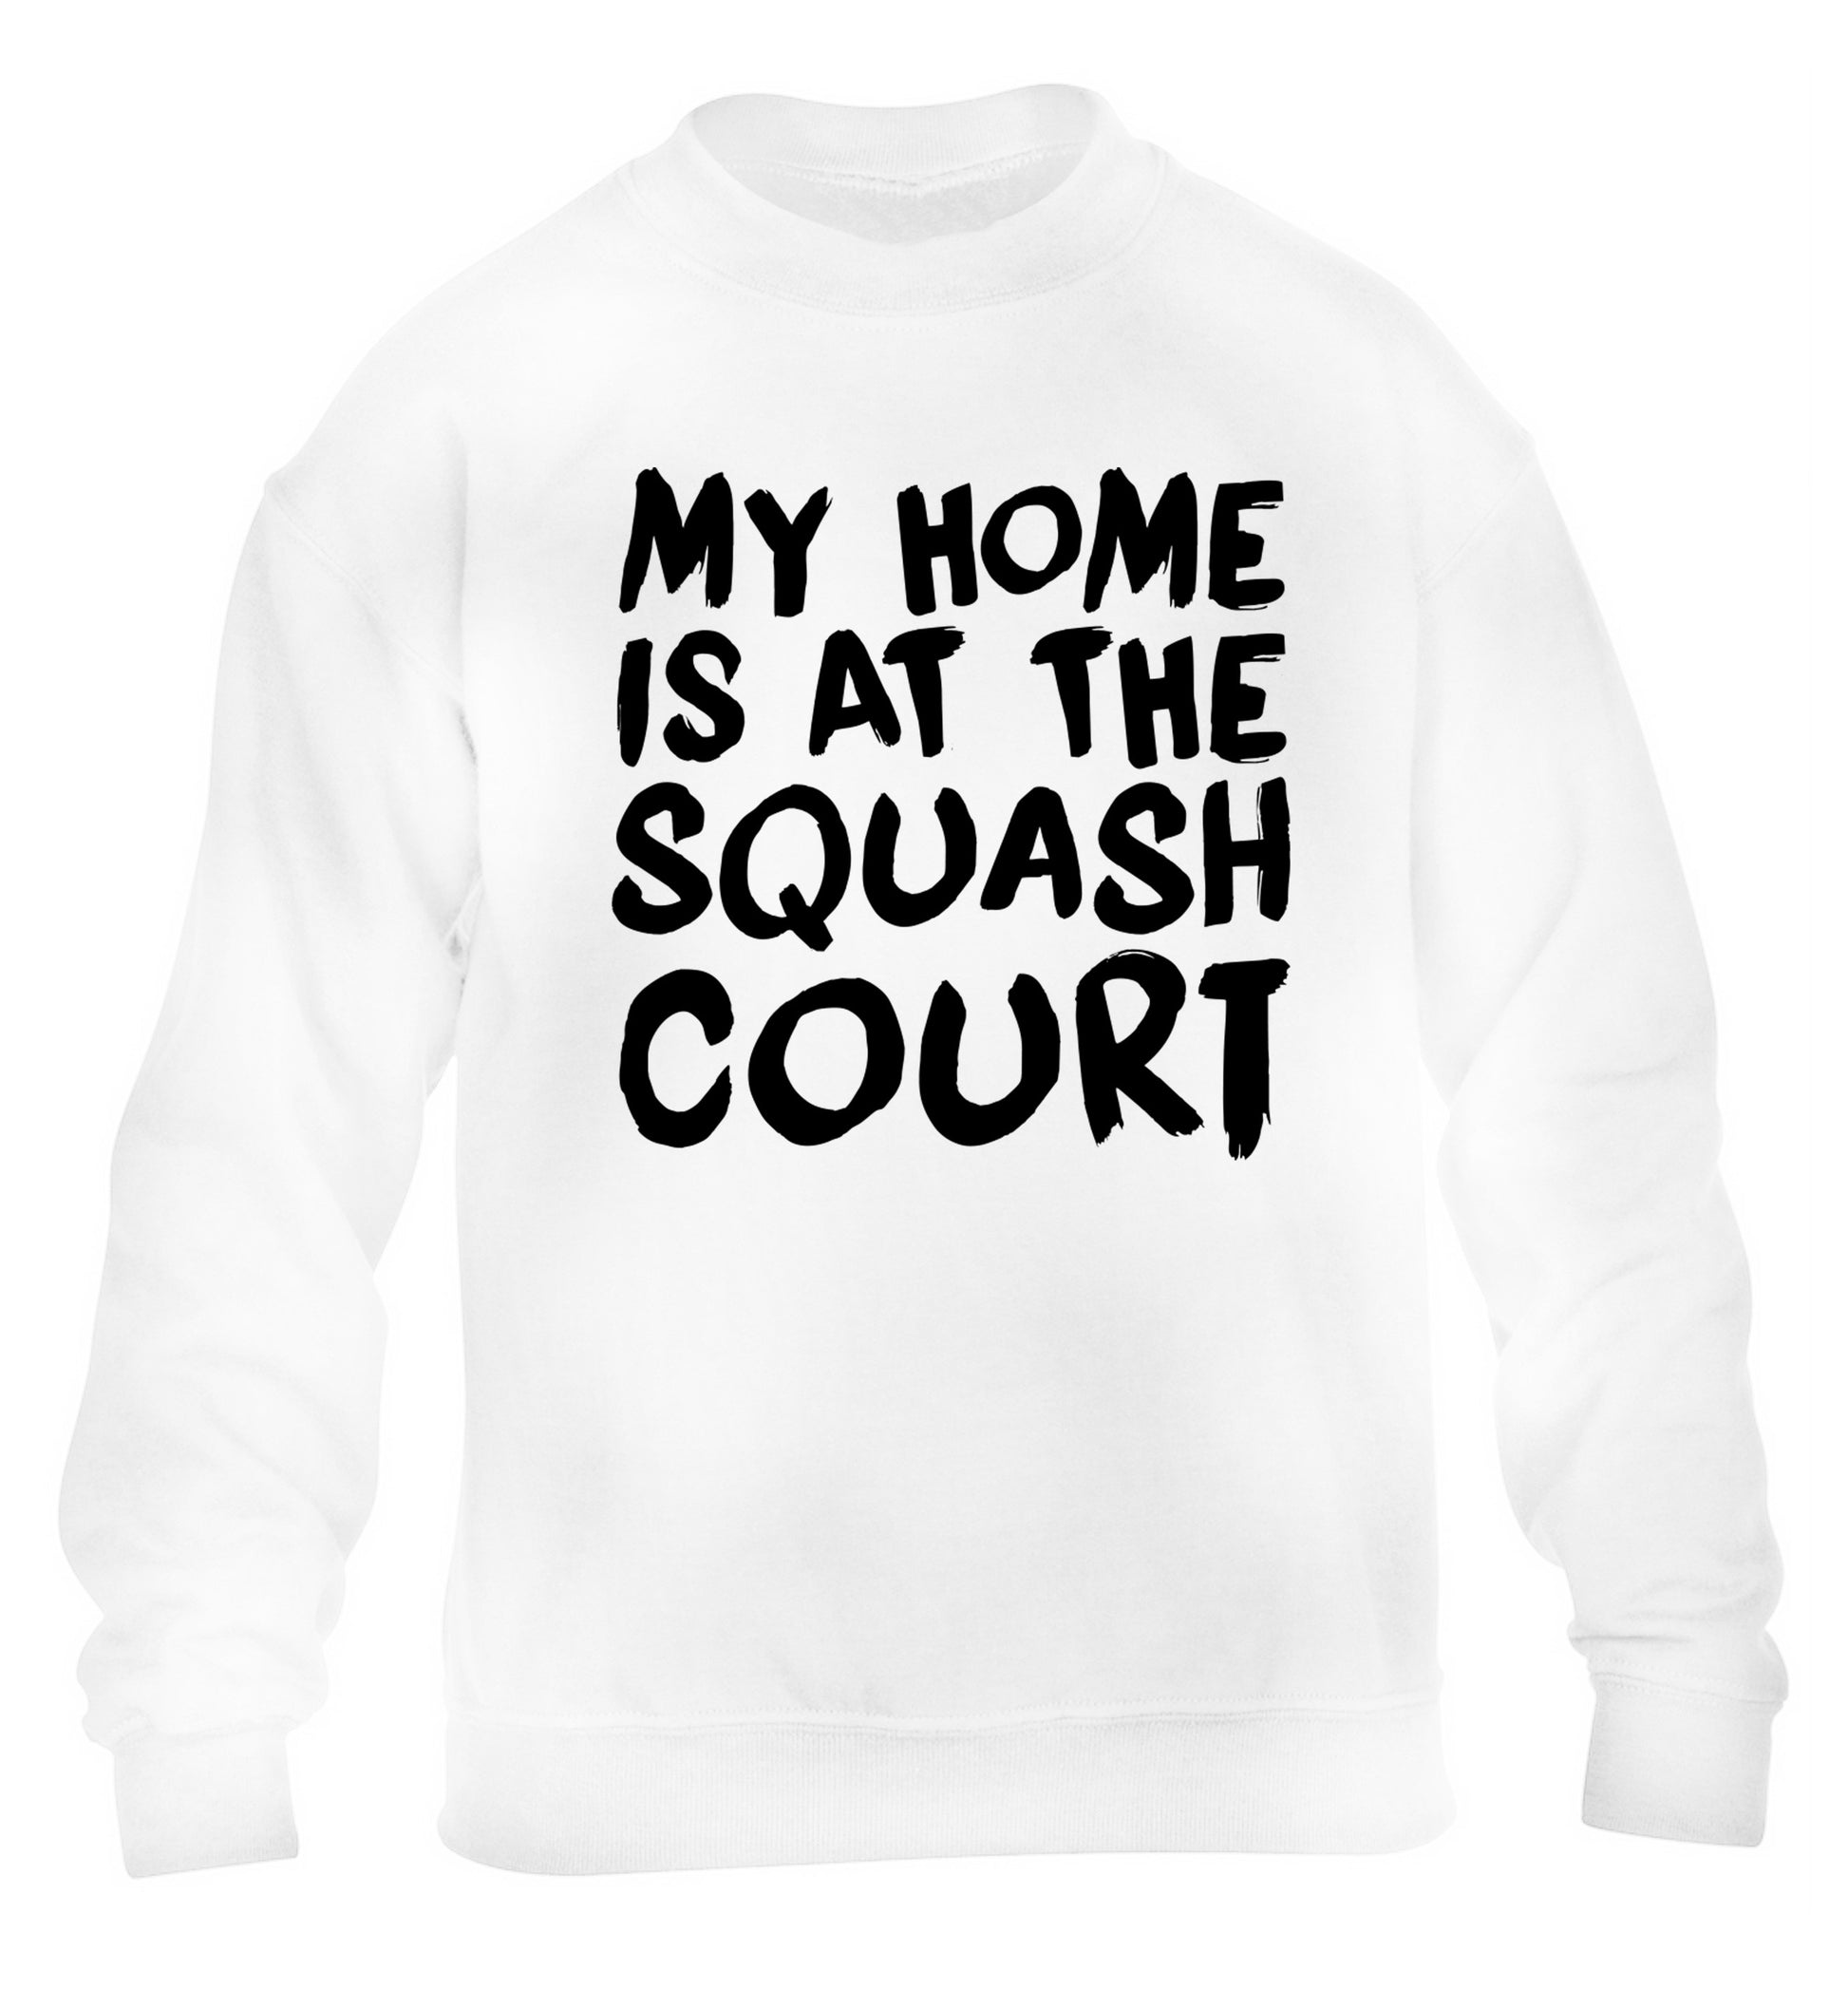 My home is at the squash court children's white sweater 12-14 Years